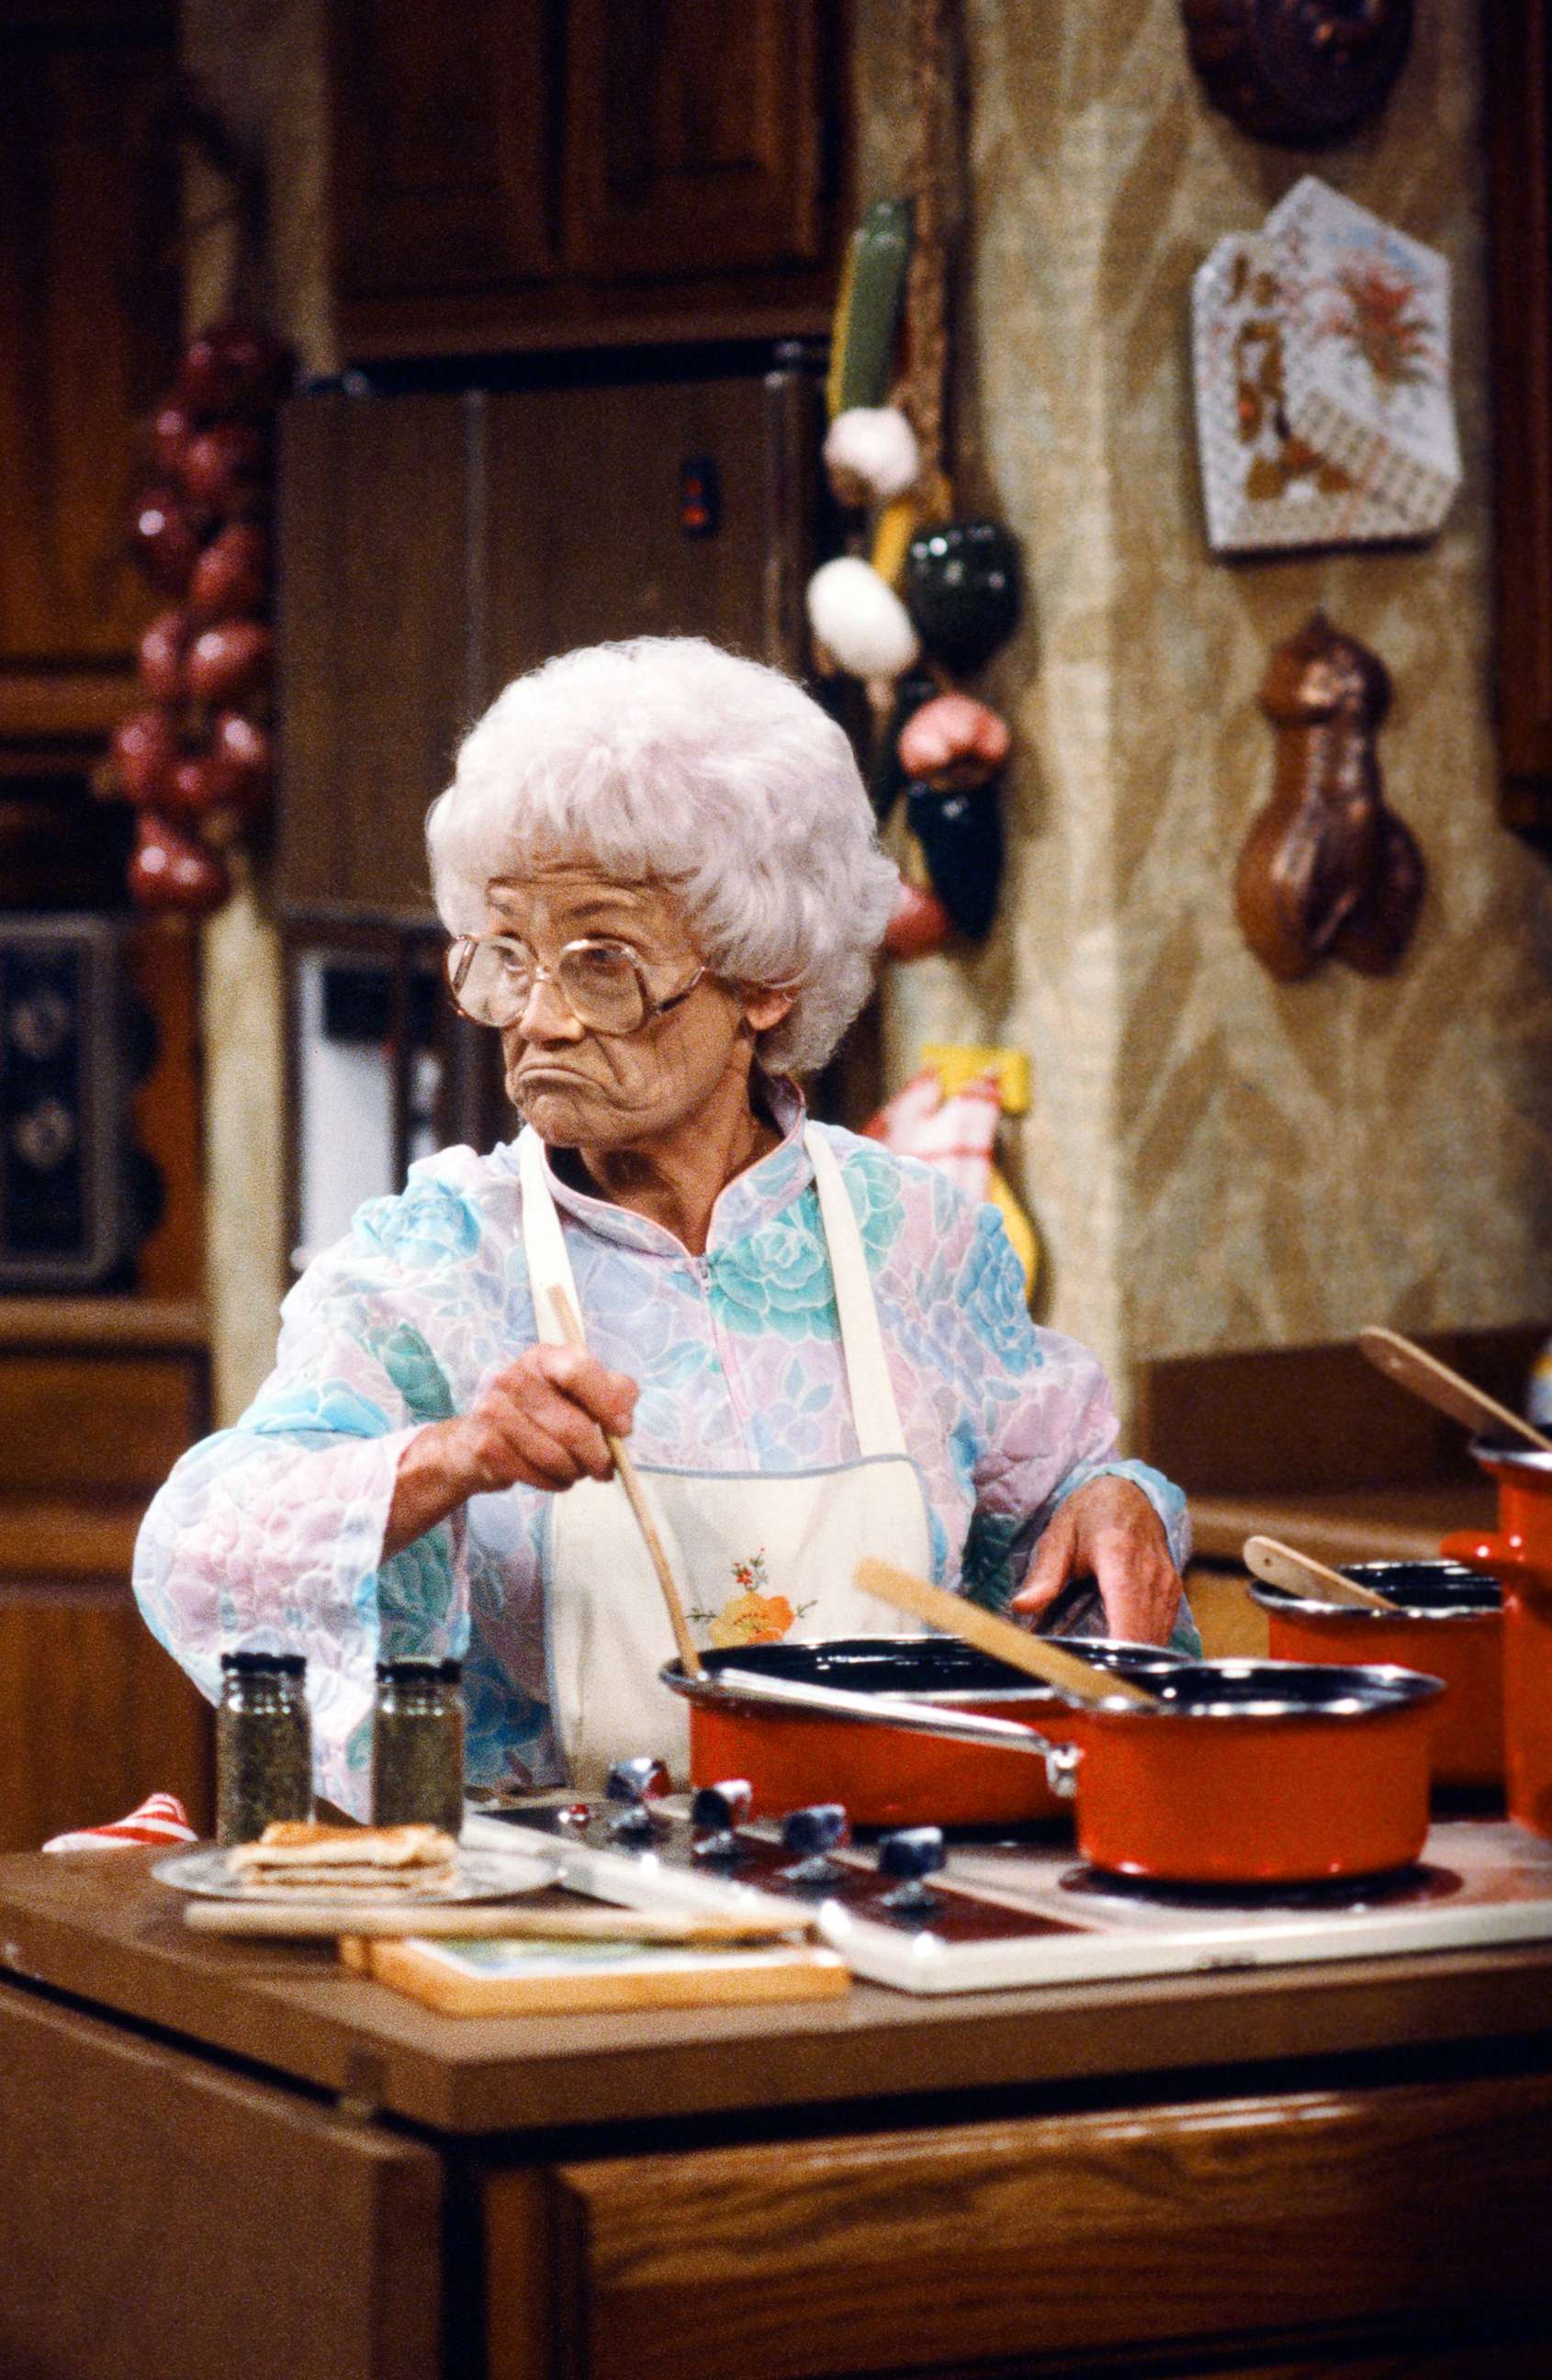 PHOTO: Estelle Getty starred as Sophia Petrillo on "The Golden Girls." Despite playing Bea Arthur's mother in the show, Getty was a year younger than Arthur in real life.